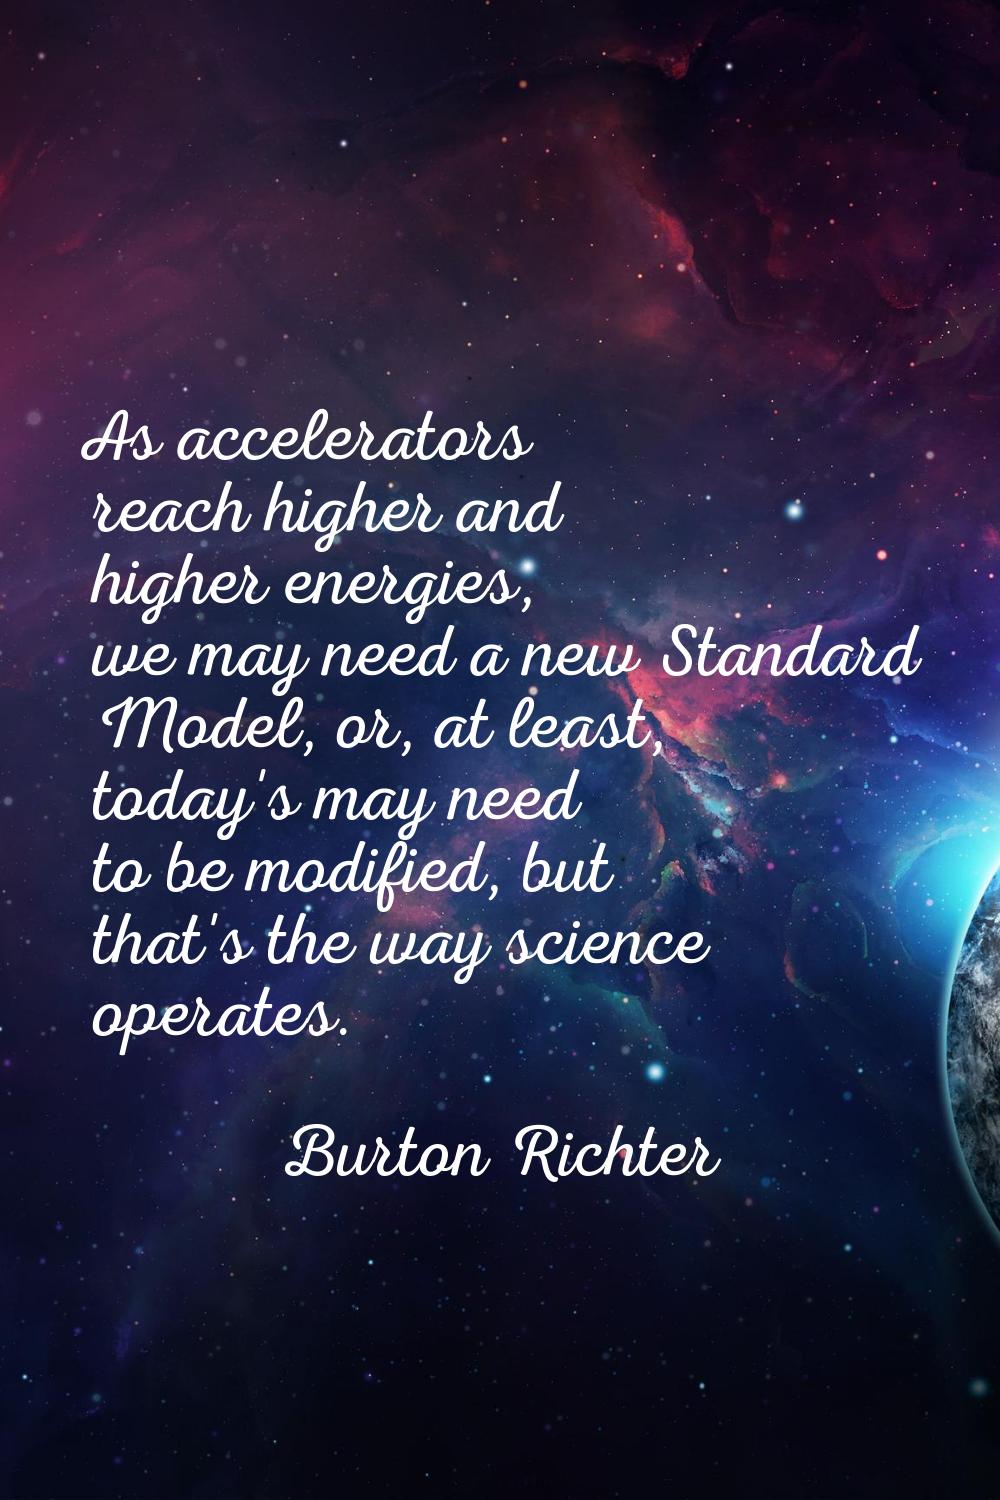 As accelerators reach higher and higher energies, we may need a new Standard Model, or, at least, t